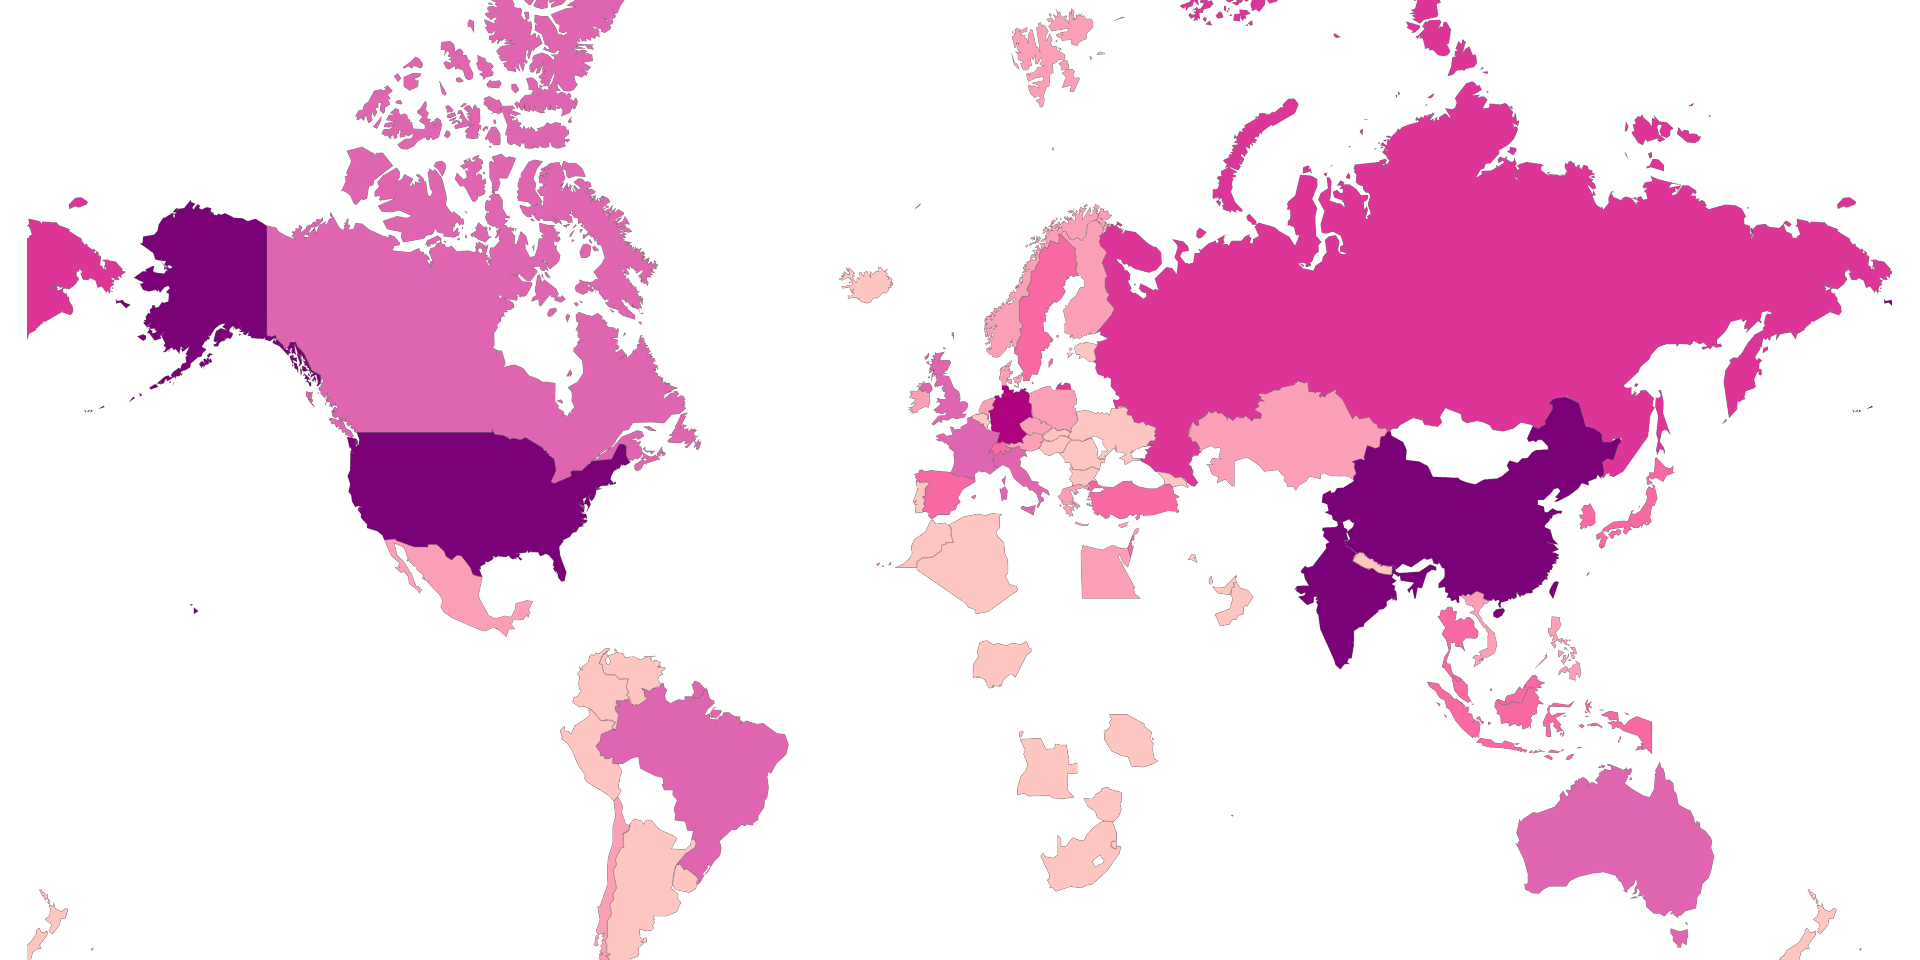 Billionaires By Country 2023 (Forbes)